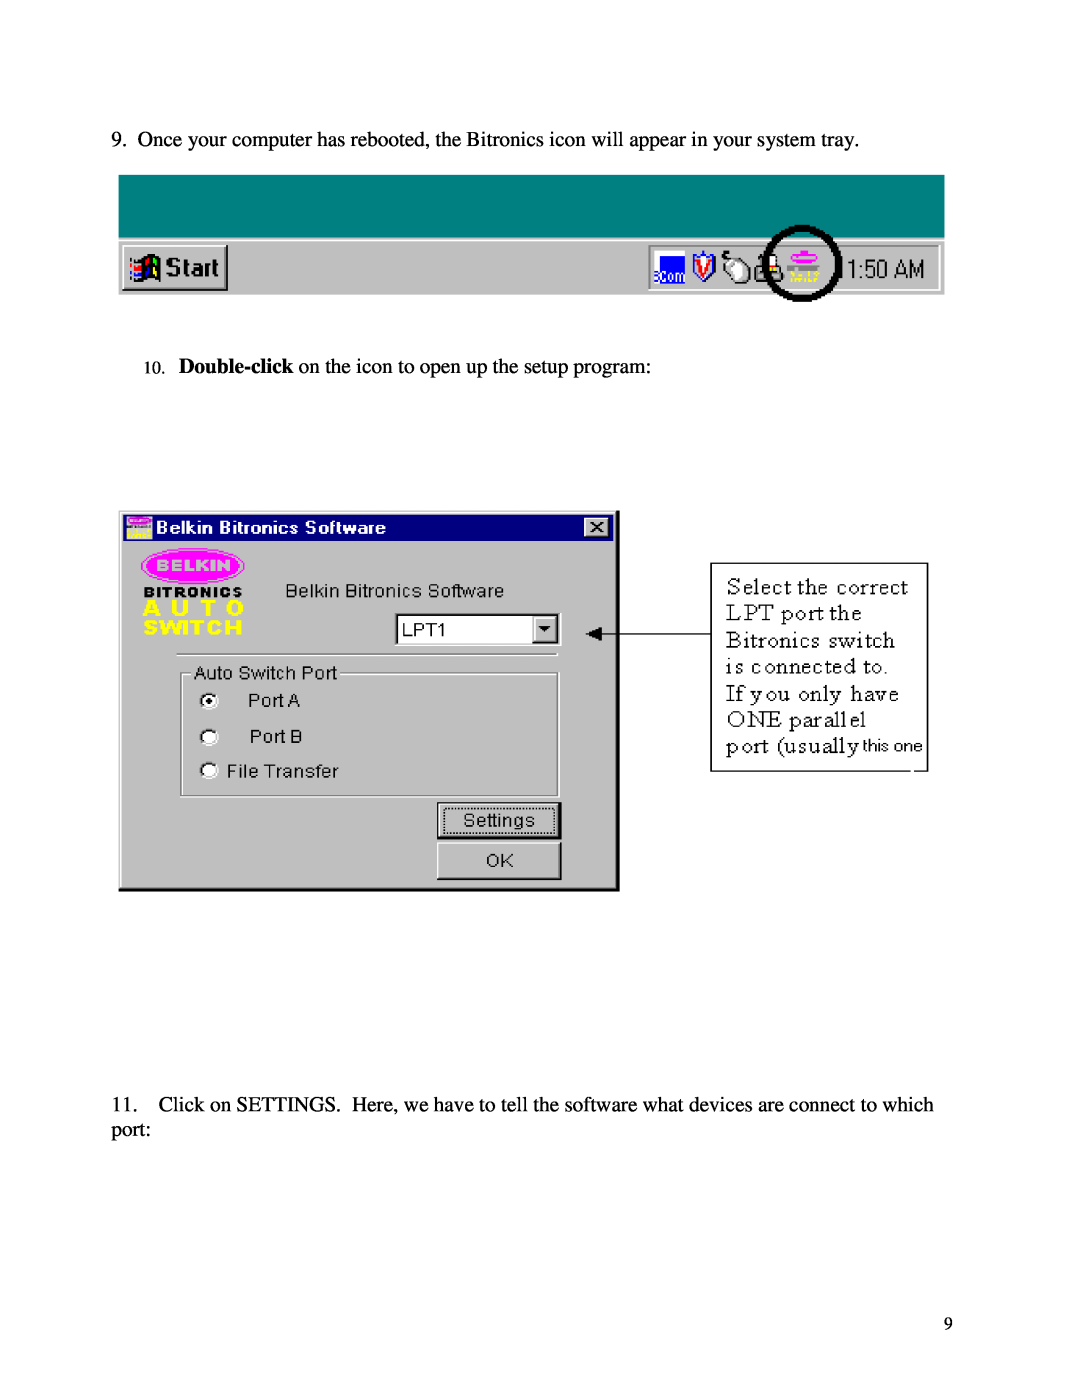 Belkin WINDOWS NT/2k/XP manual Double-click on the icon to open up the setup program, port 